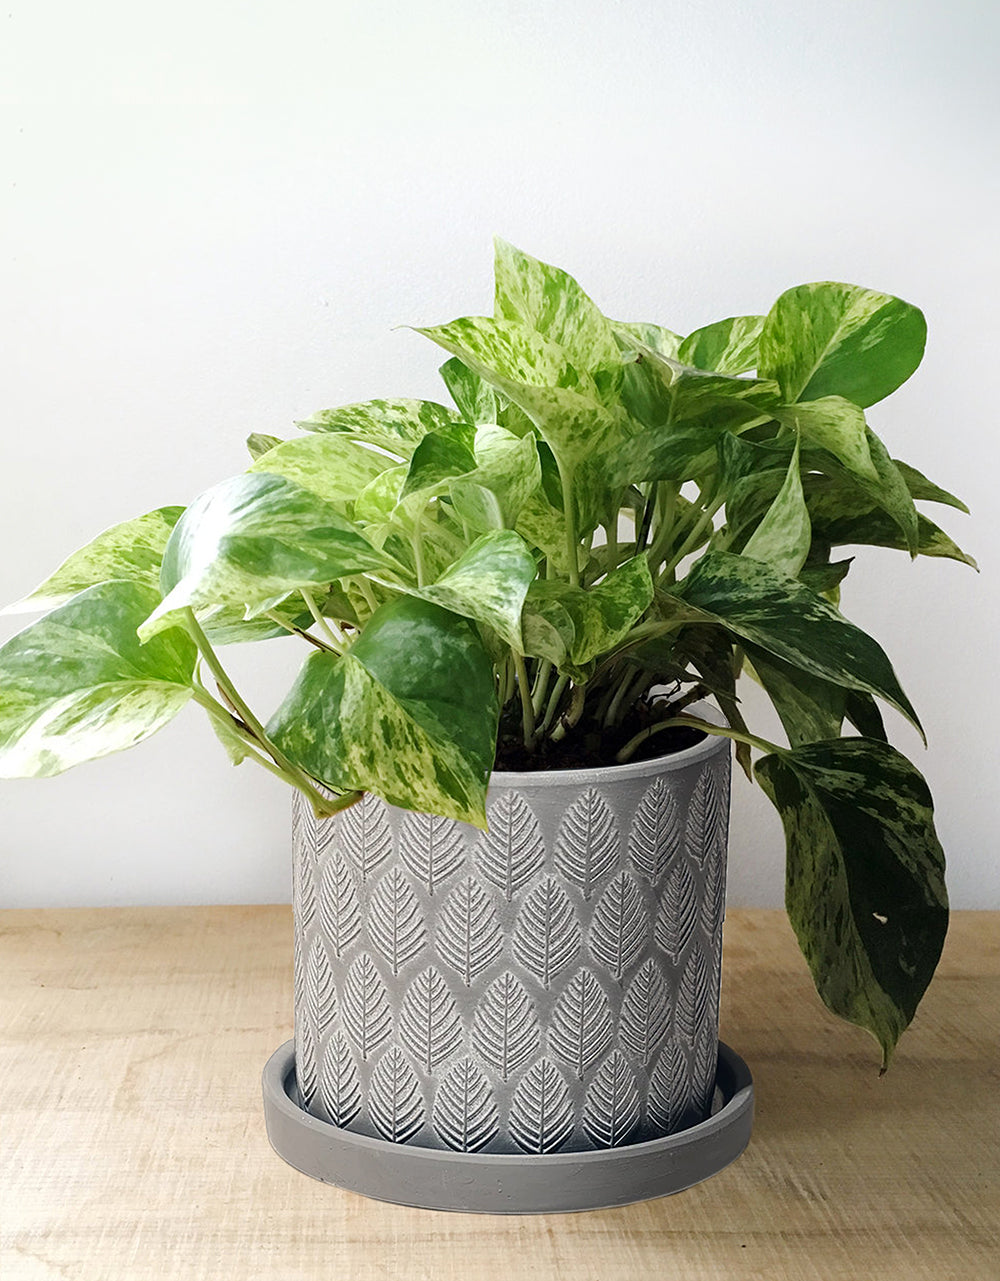 Pothos - Easy Plants to Start with